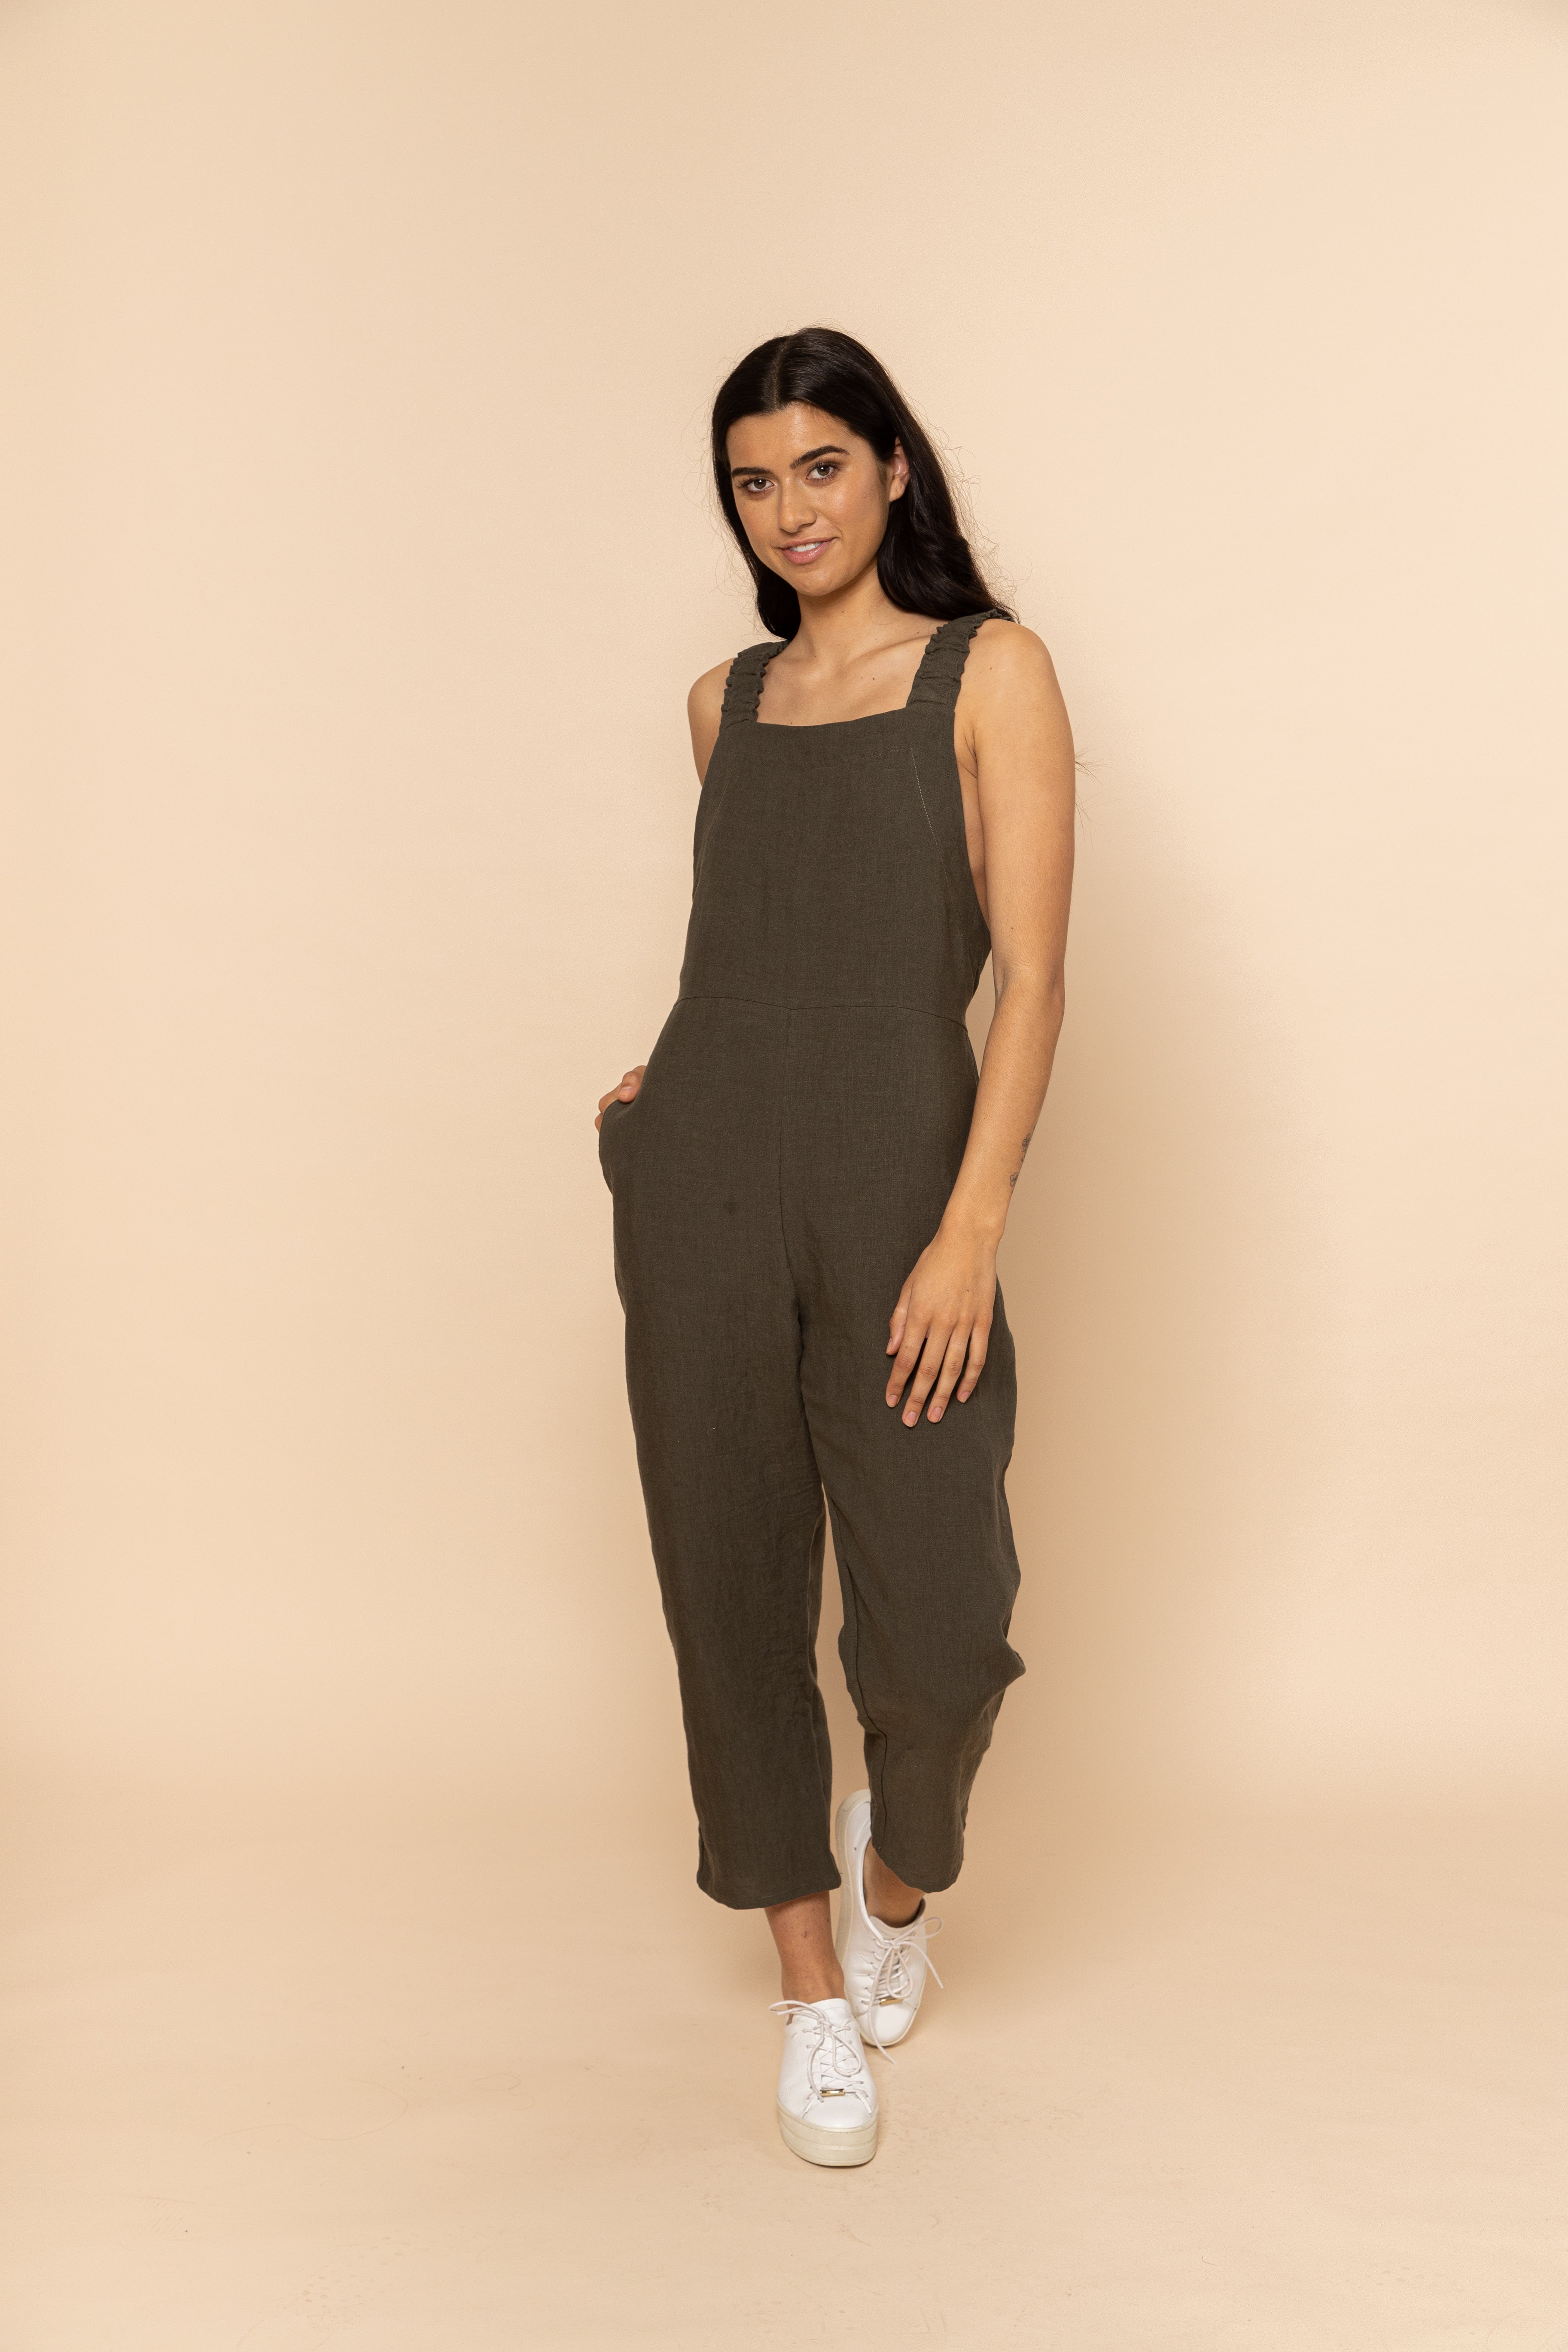 Womens Recession Jumpsuit by RVCA  Amazon Surf